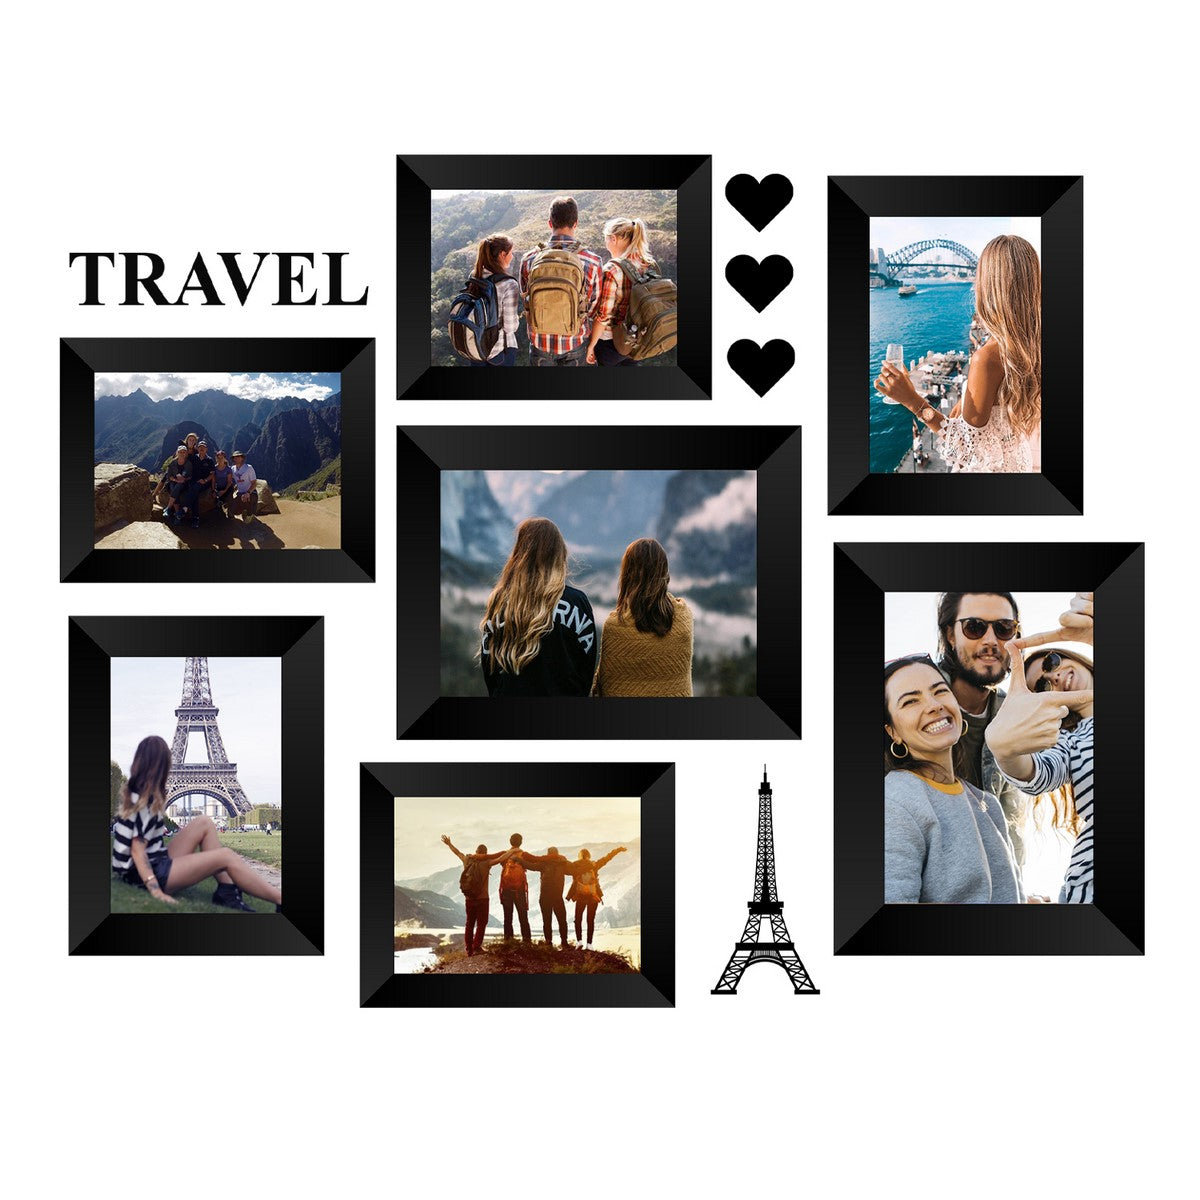 Memory Wall Collage Photo Frame - Set of 7 Photo Frames for 5 Photos of 4"x6", 2 Photos of 5"x7", 1 Piece of TRAVEL, 1 Piece of EIFFEL TOWER, 3 Pieces of HEARTS